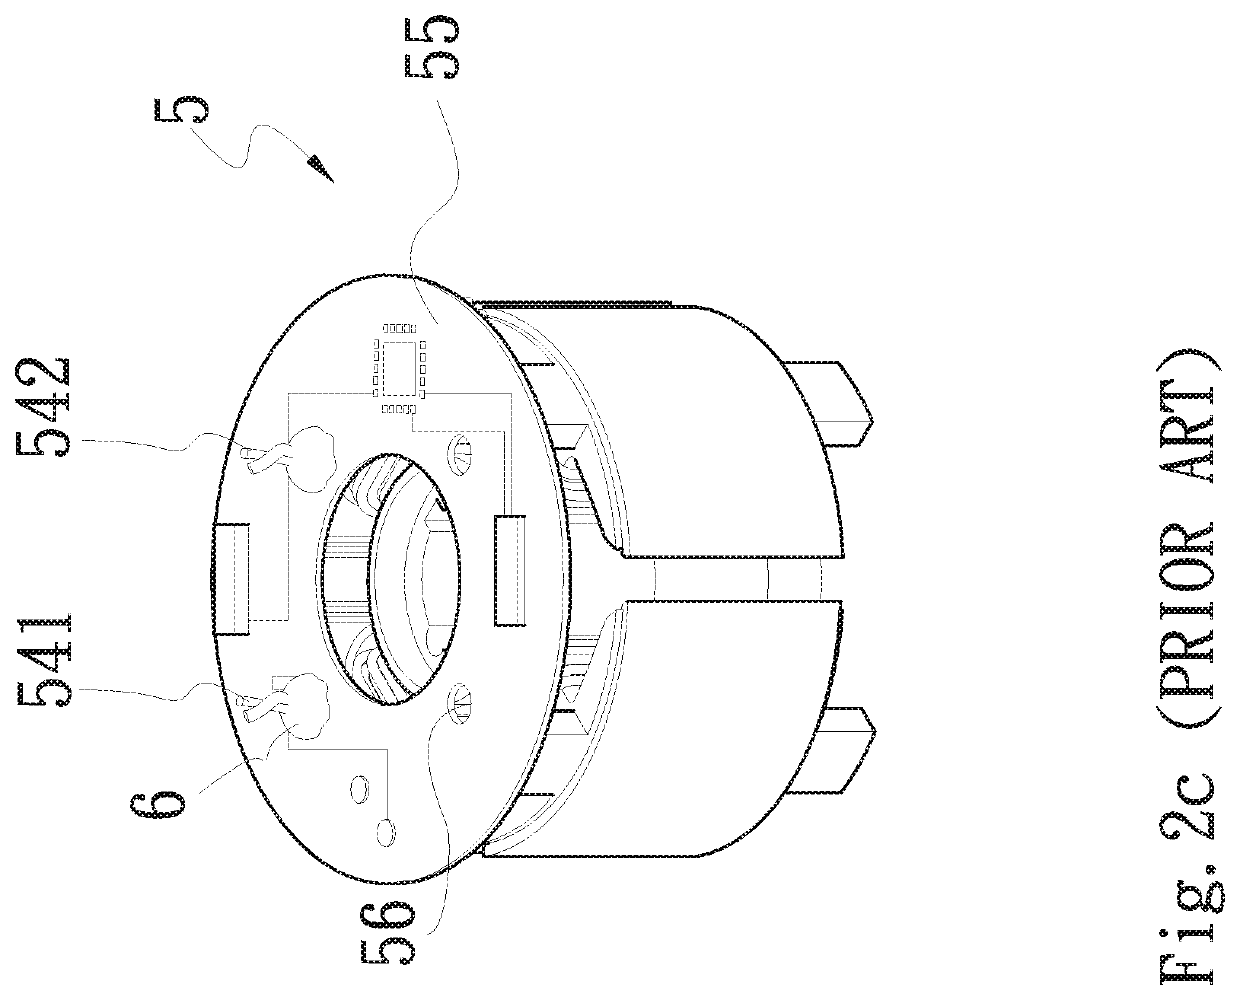 Manufacturing method of fan stator structure